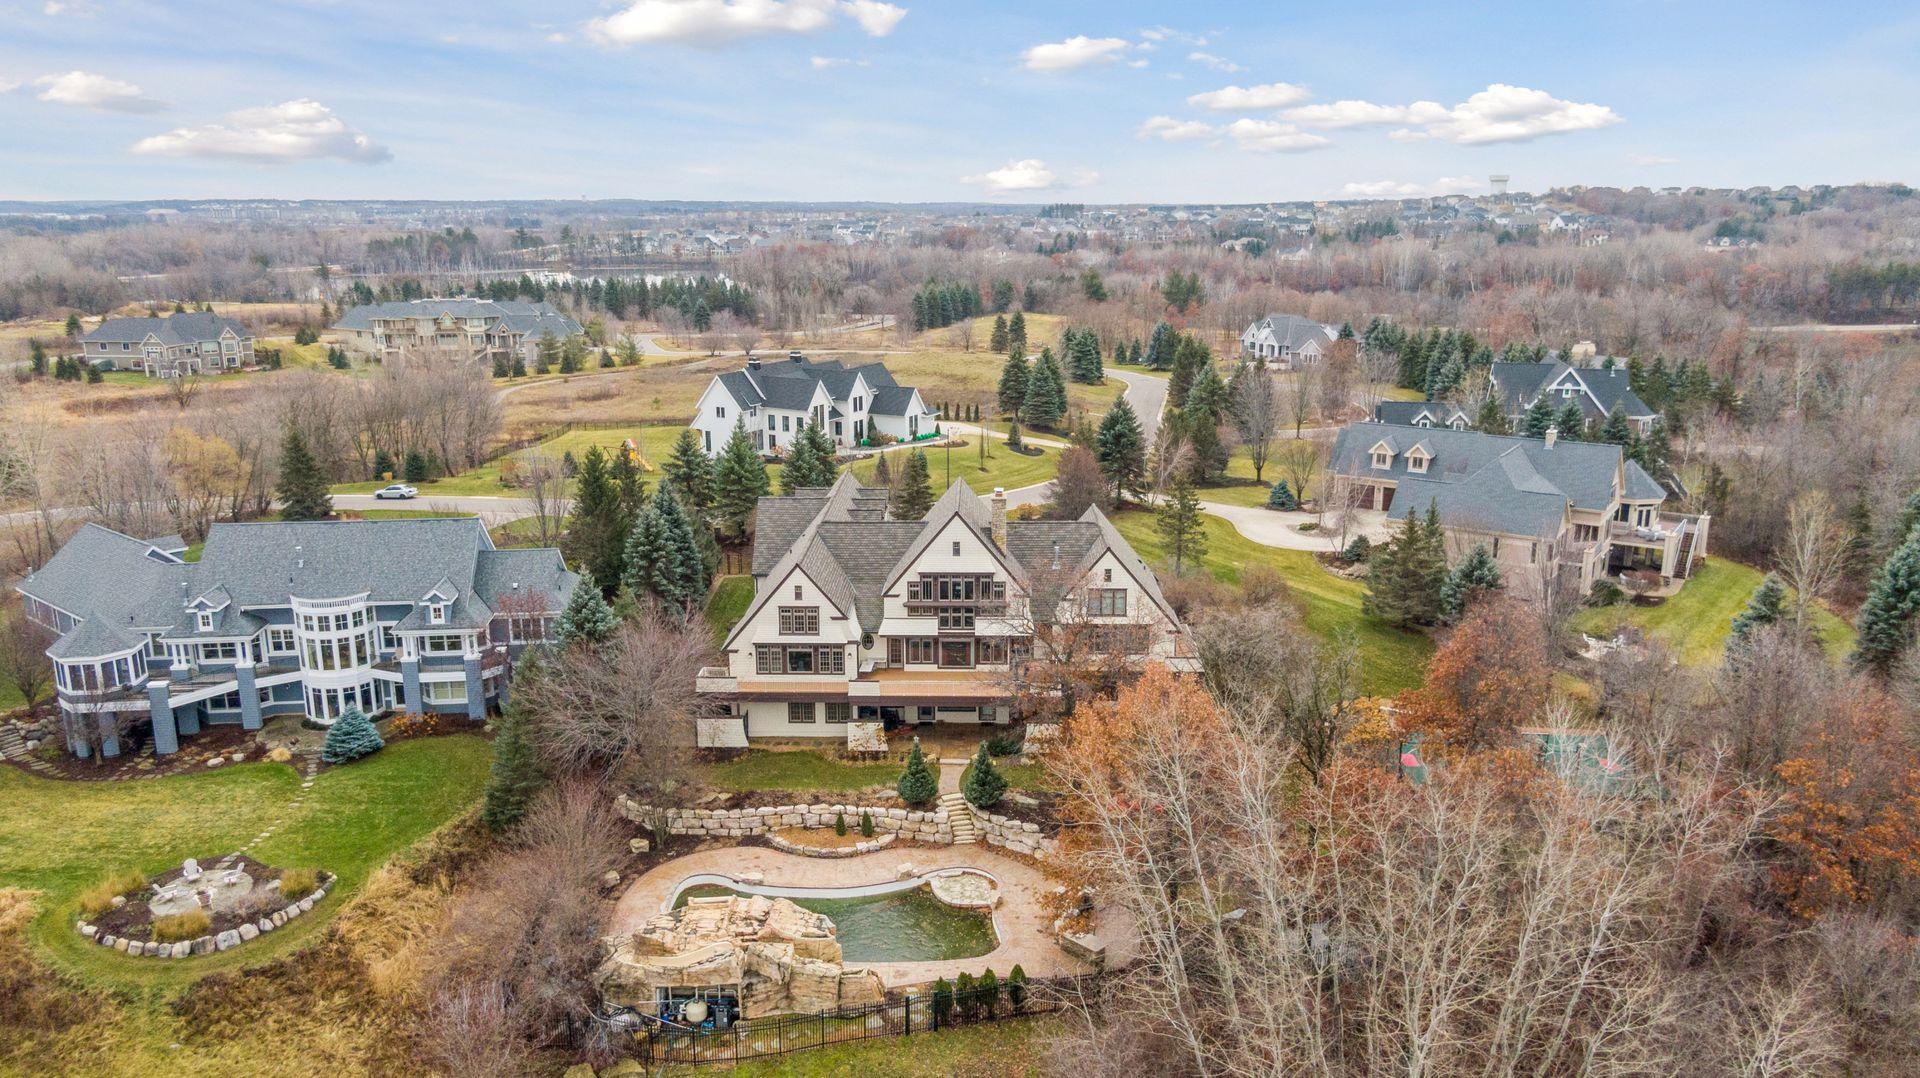 Nestled in this luxury community in Whistling Valley with a sprawling 1.1 acre lot, this home backs to a private 3 mile walking path exclusive only to this community.